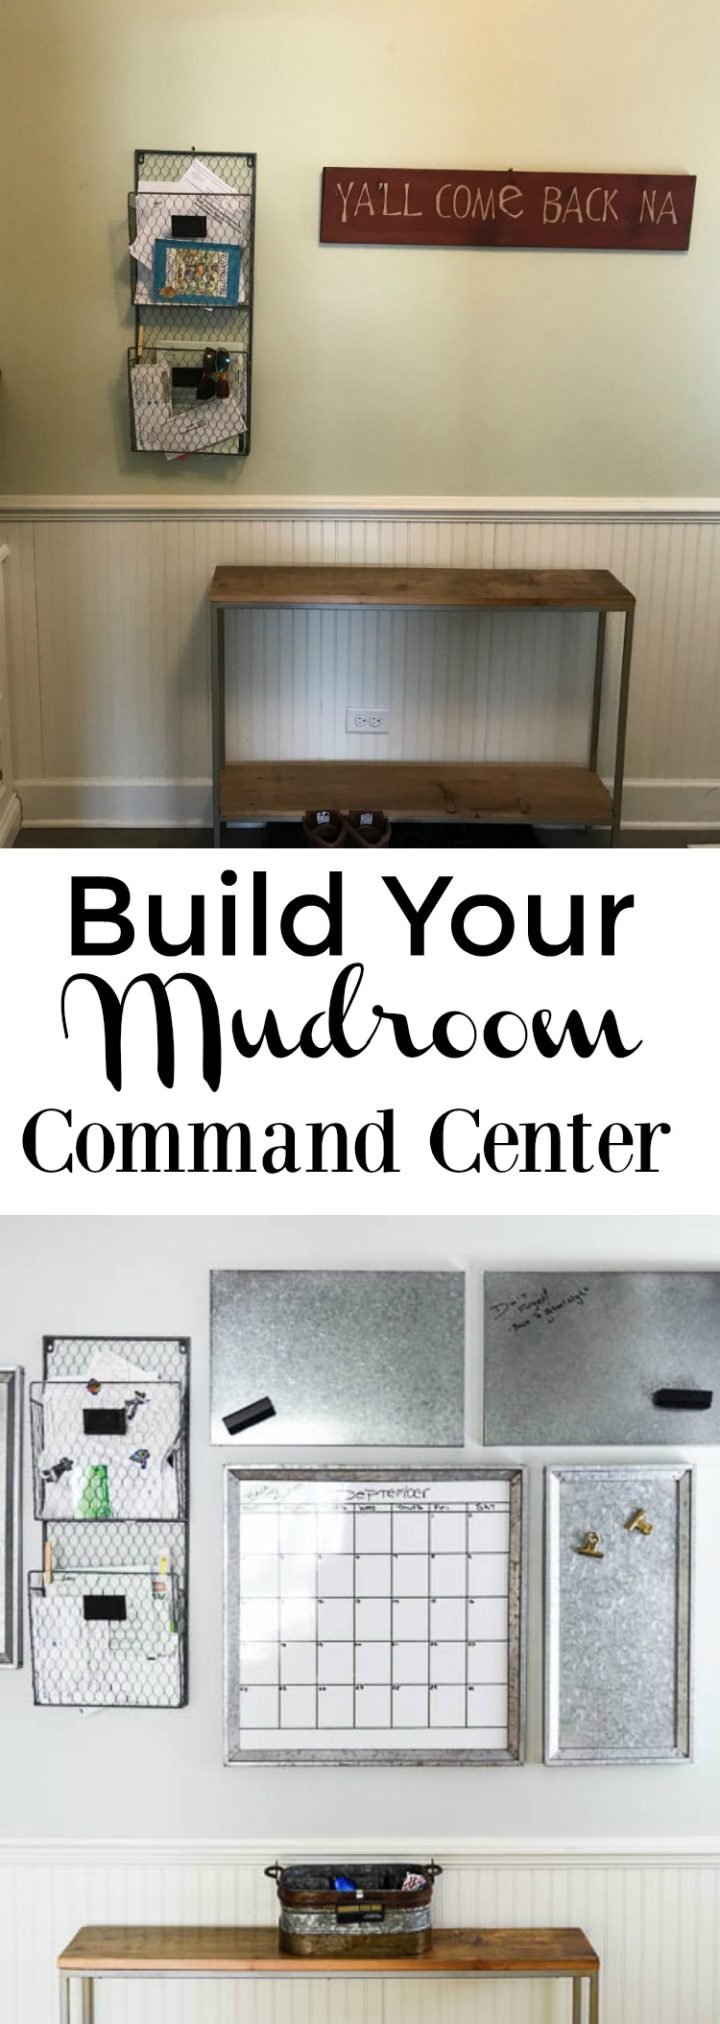 Quick tips to install a mudroom command center with everything you need from Potterybarn. #designtips #mudroom #commandcenter for more visit www.homewithkeki.com